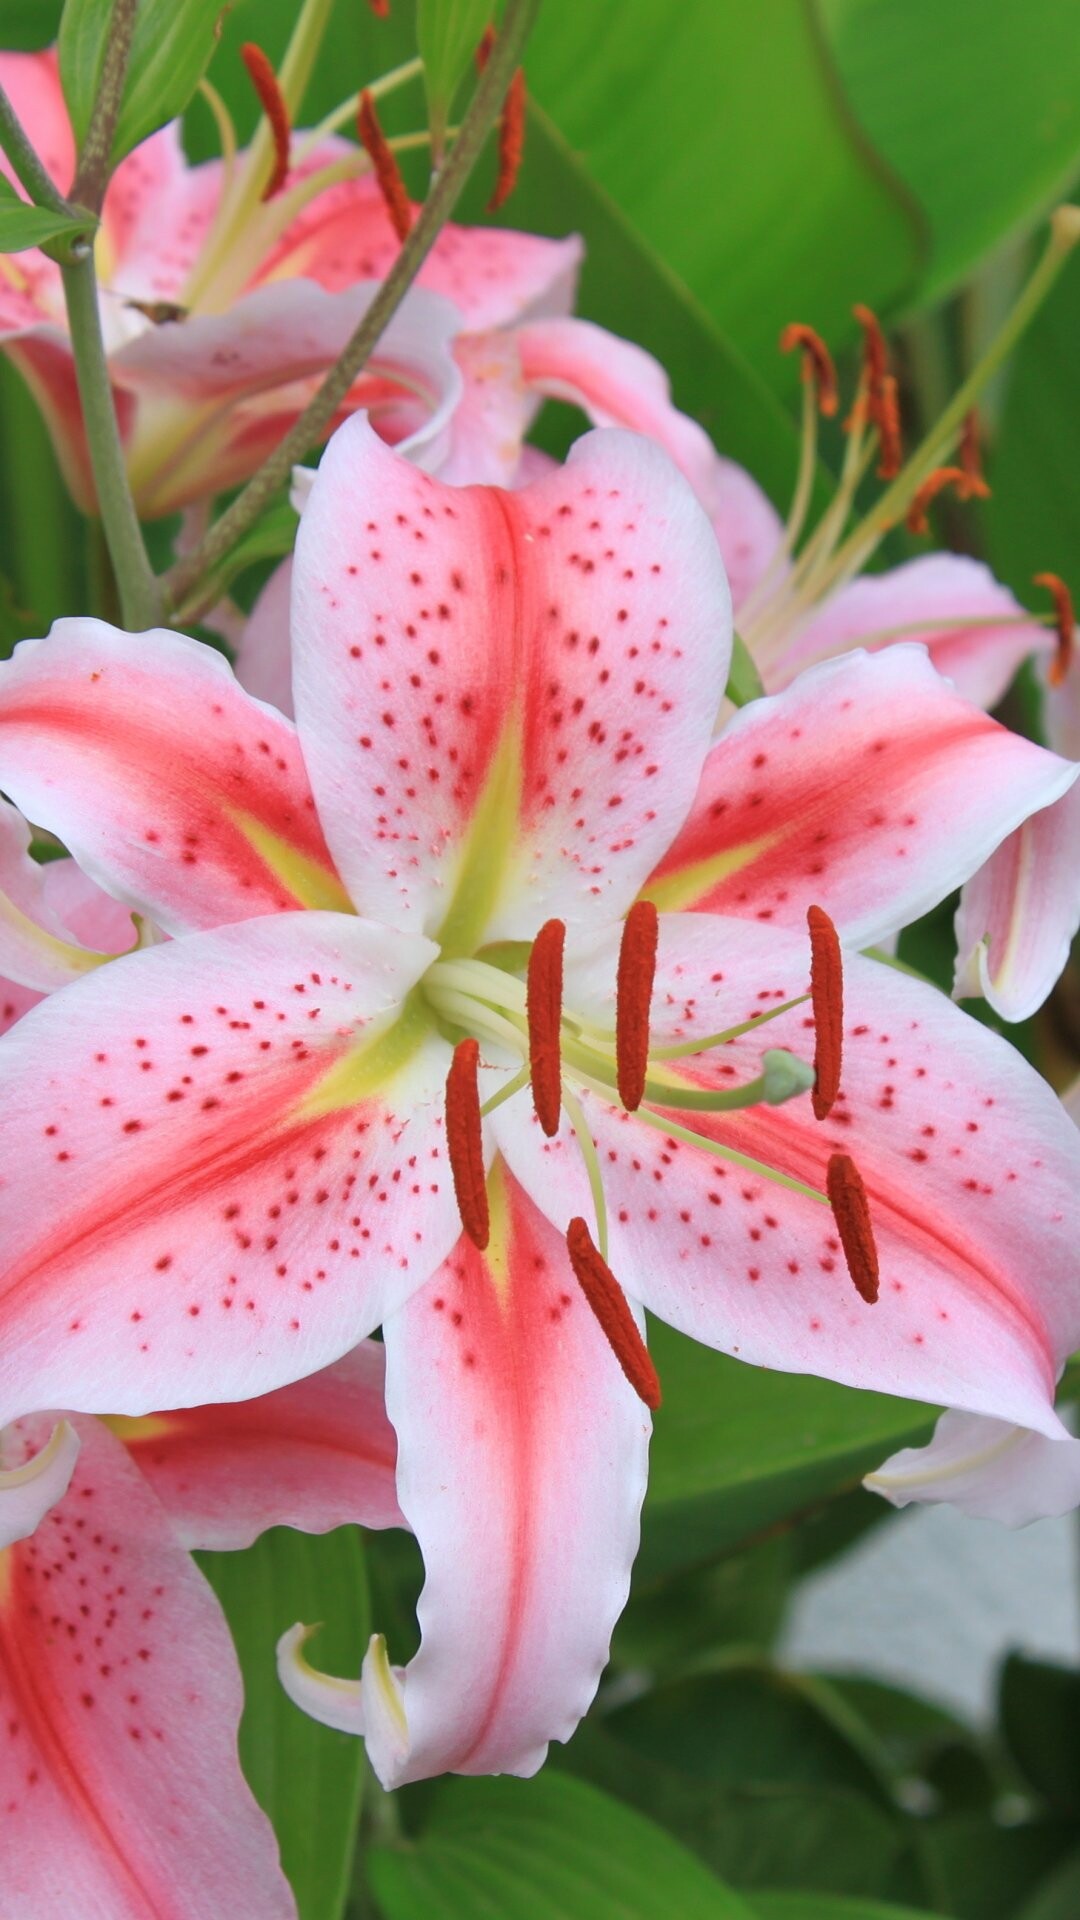 Lily: A symbol of purity and innocence, Flowering plant. 1080x1920 Full HD Wallpaper.